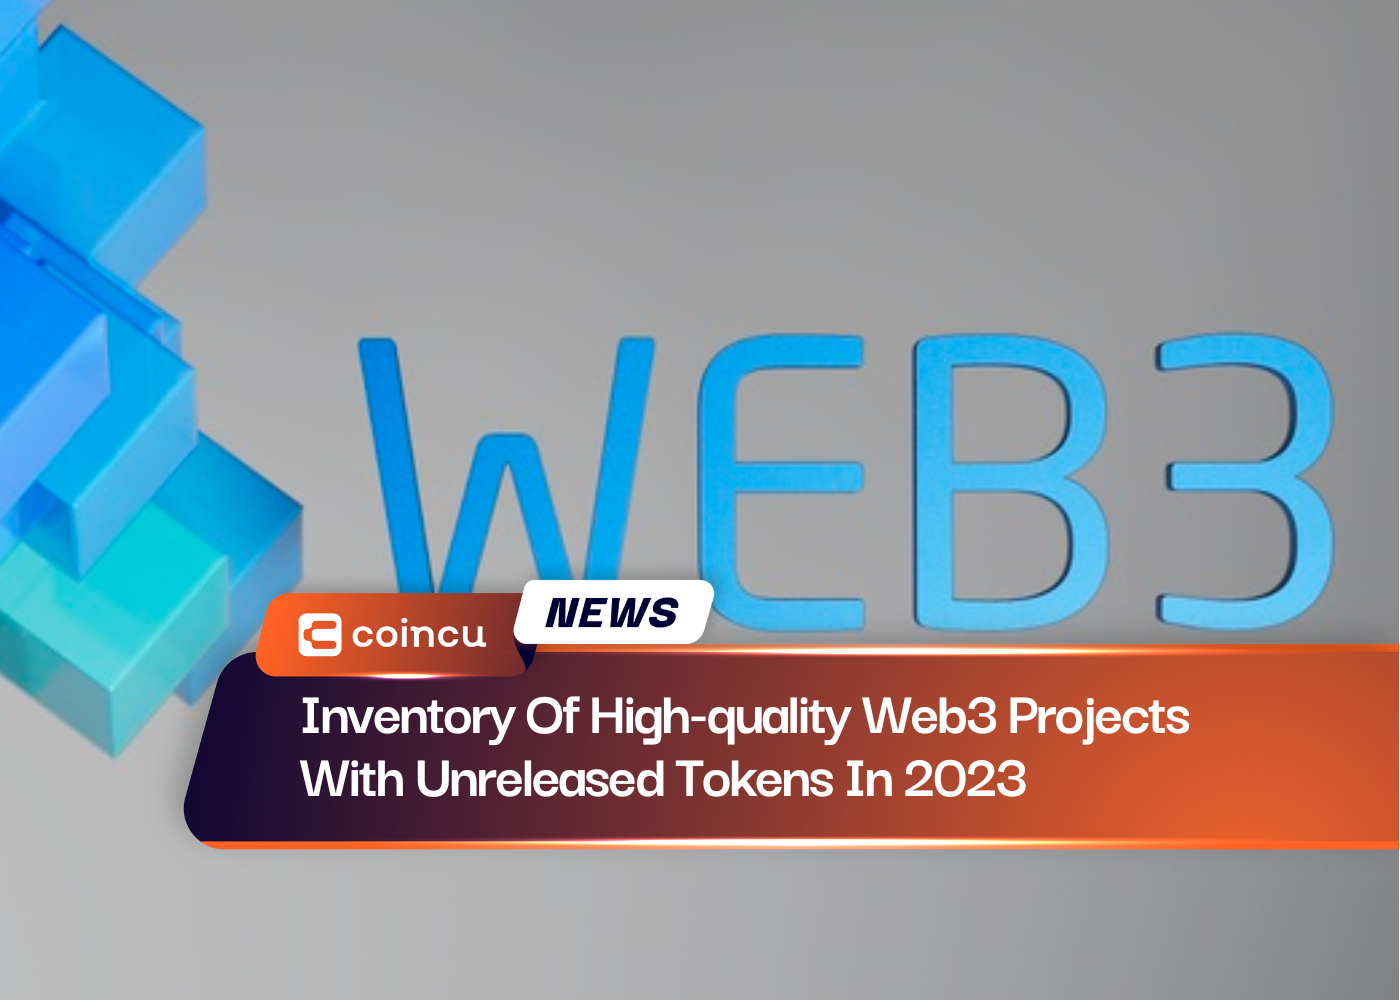 Inventory Of High-quality Web3 Projects With Unreleased Tokens In 2023